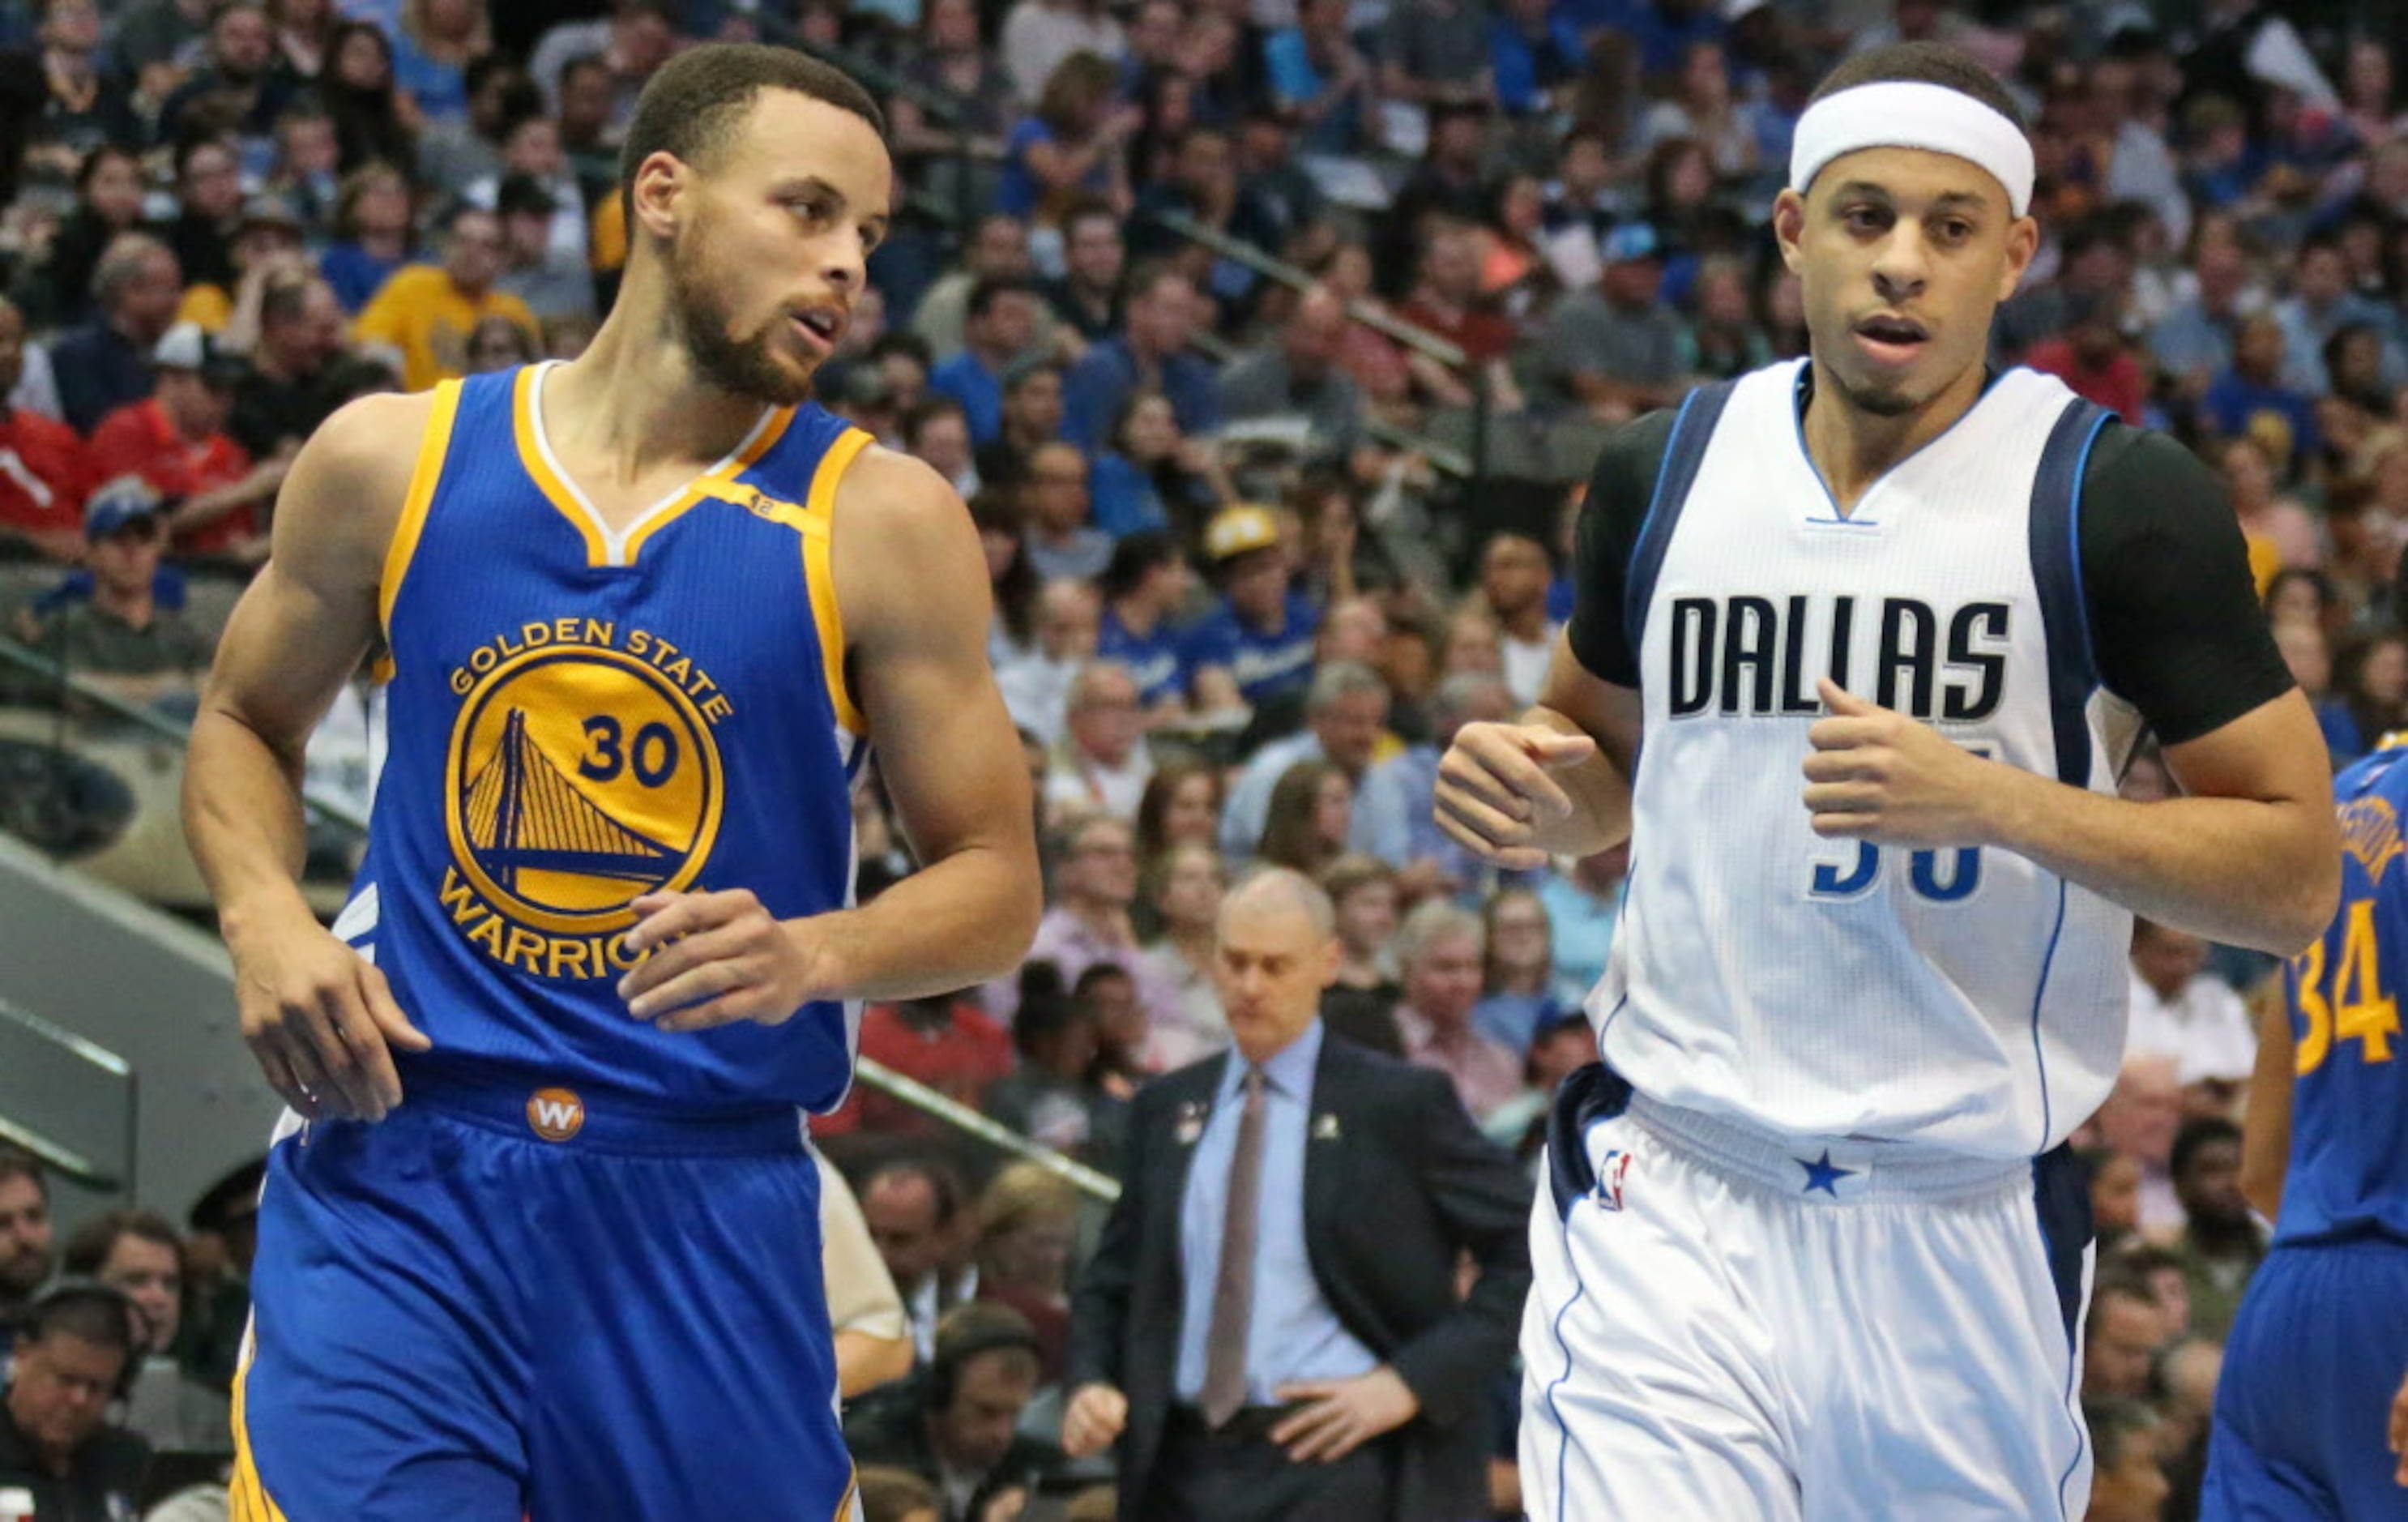 Photos from Stephen and Seth Curry matchup as Golden State